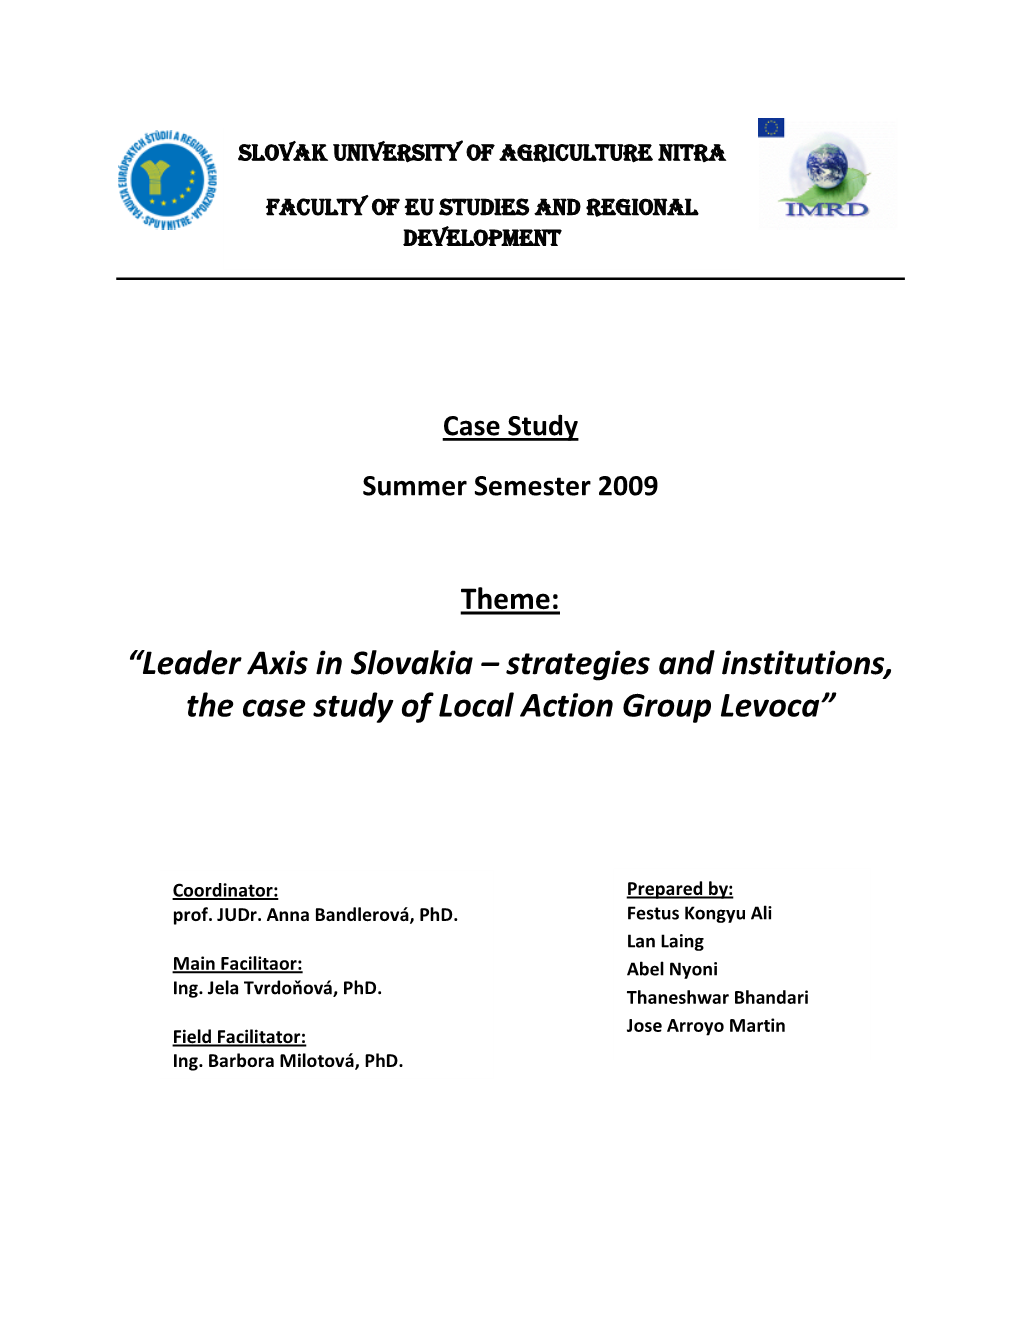 Leader Axis in Slovakia – Strategies and Institutions, the Case Study of Local Action Group Levoca”